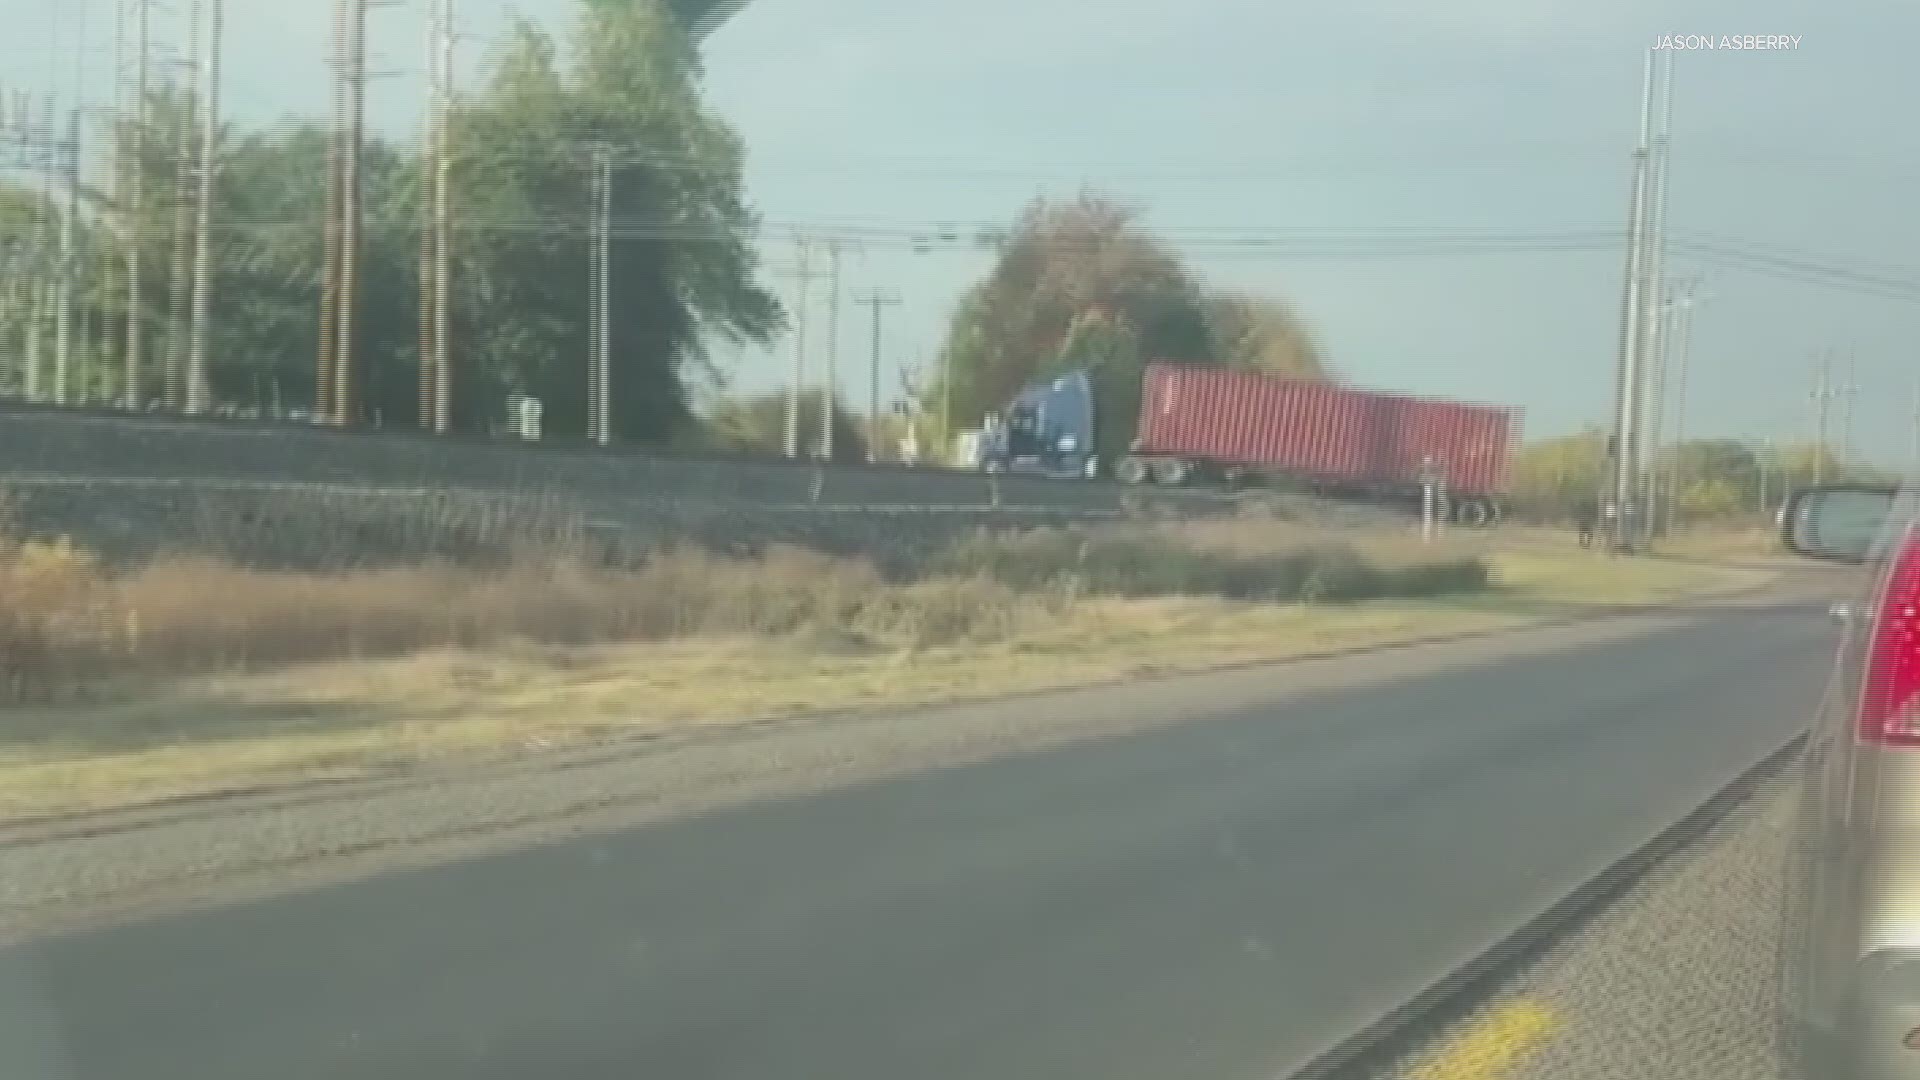 Video of a train striking a semi in Pendleton, Ind. on Oct. 9, 2020.